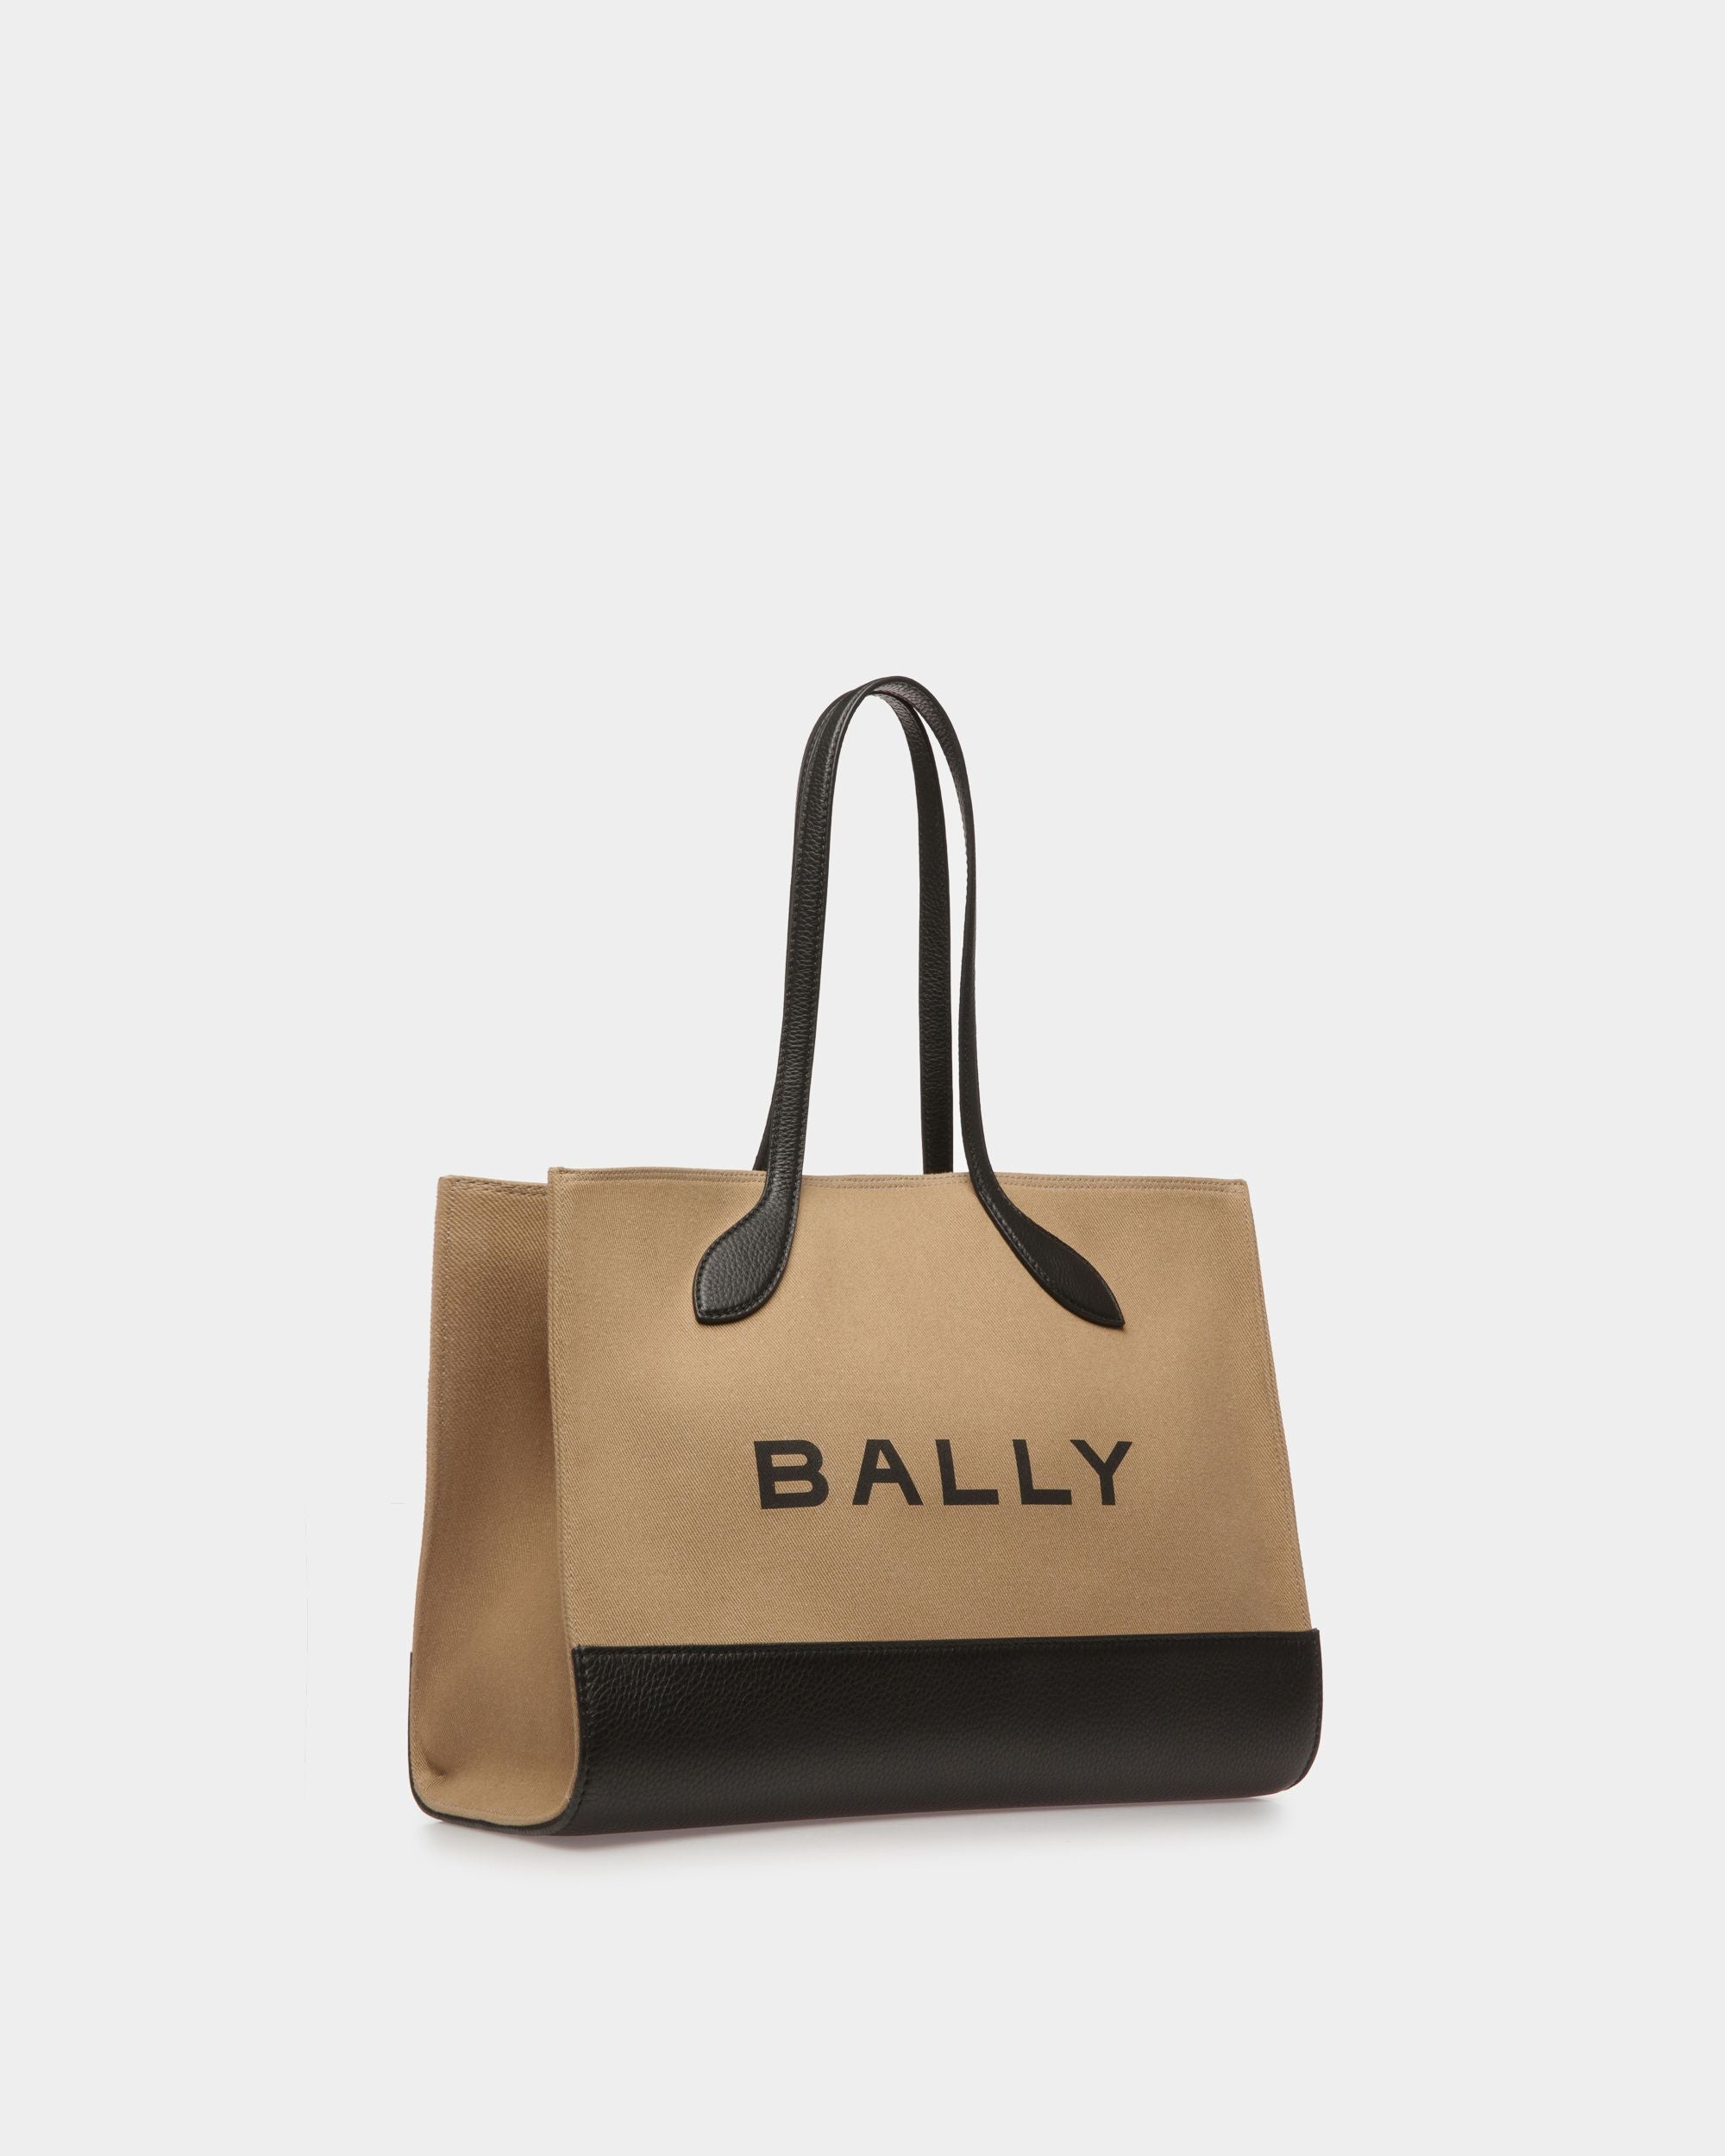 Keep On Ew | Women's Tote Bag | Sand And Black Fabric | Bally | Still Life 3/4 Front